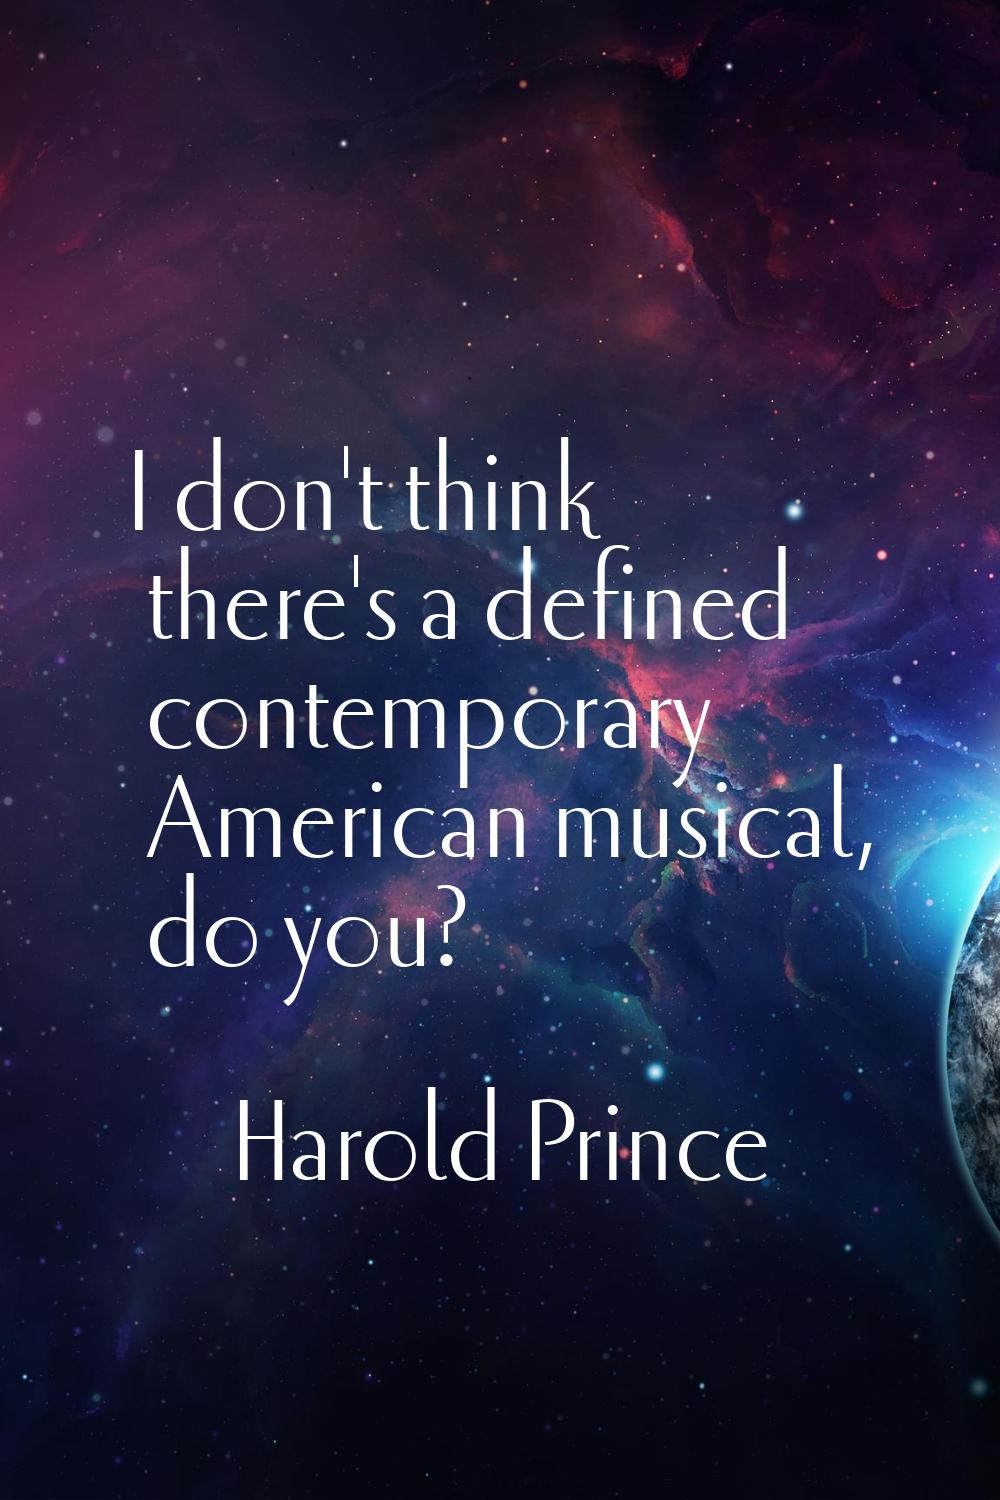 I don't think there's a defined contemporary American musical, do you?